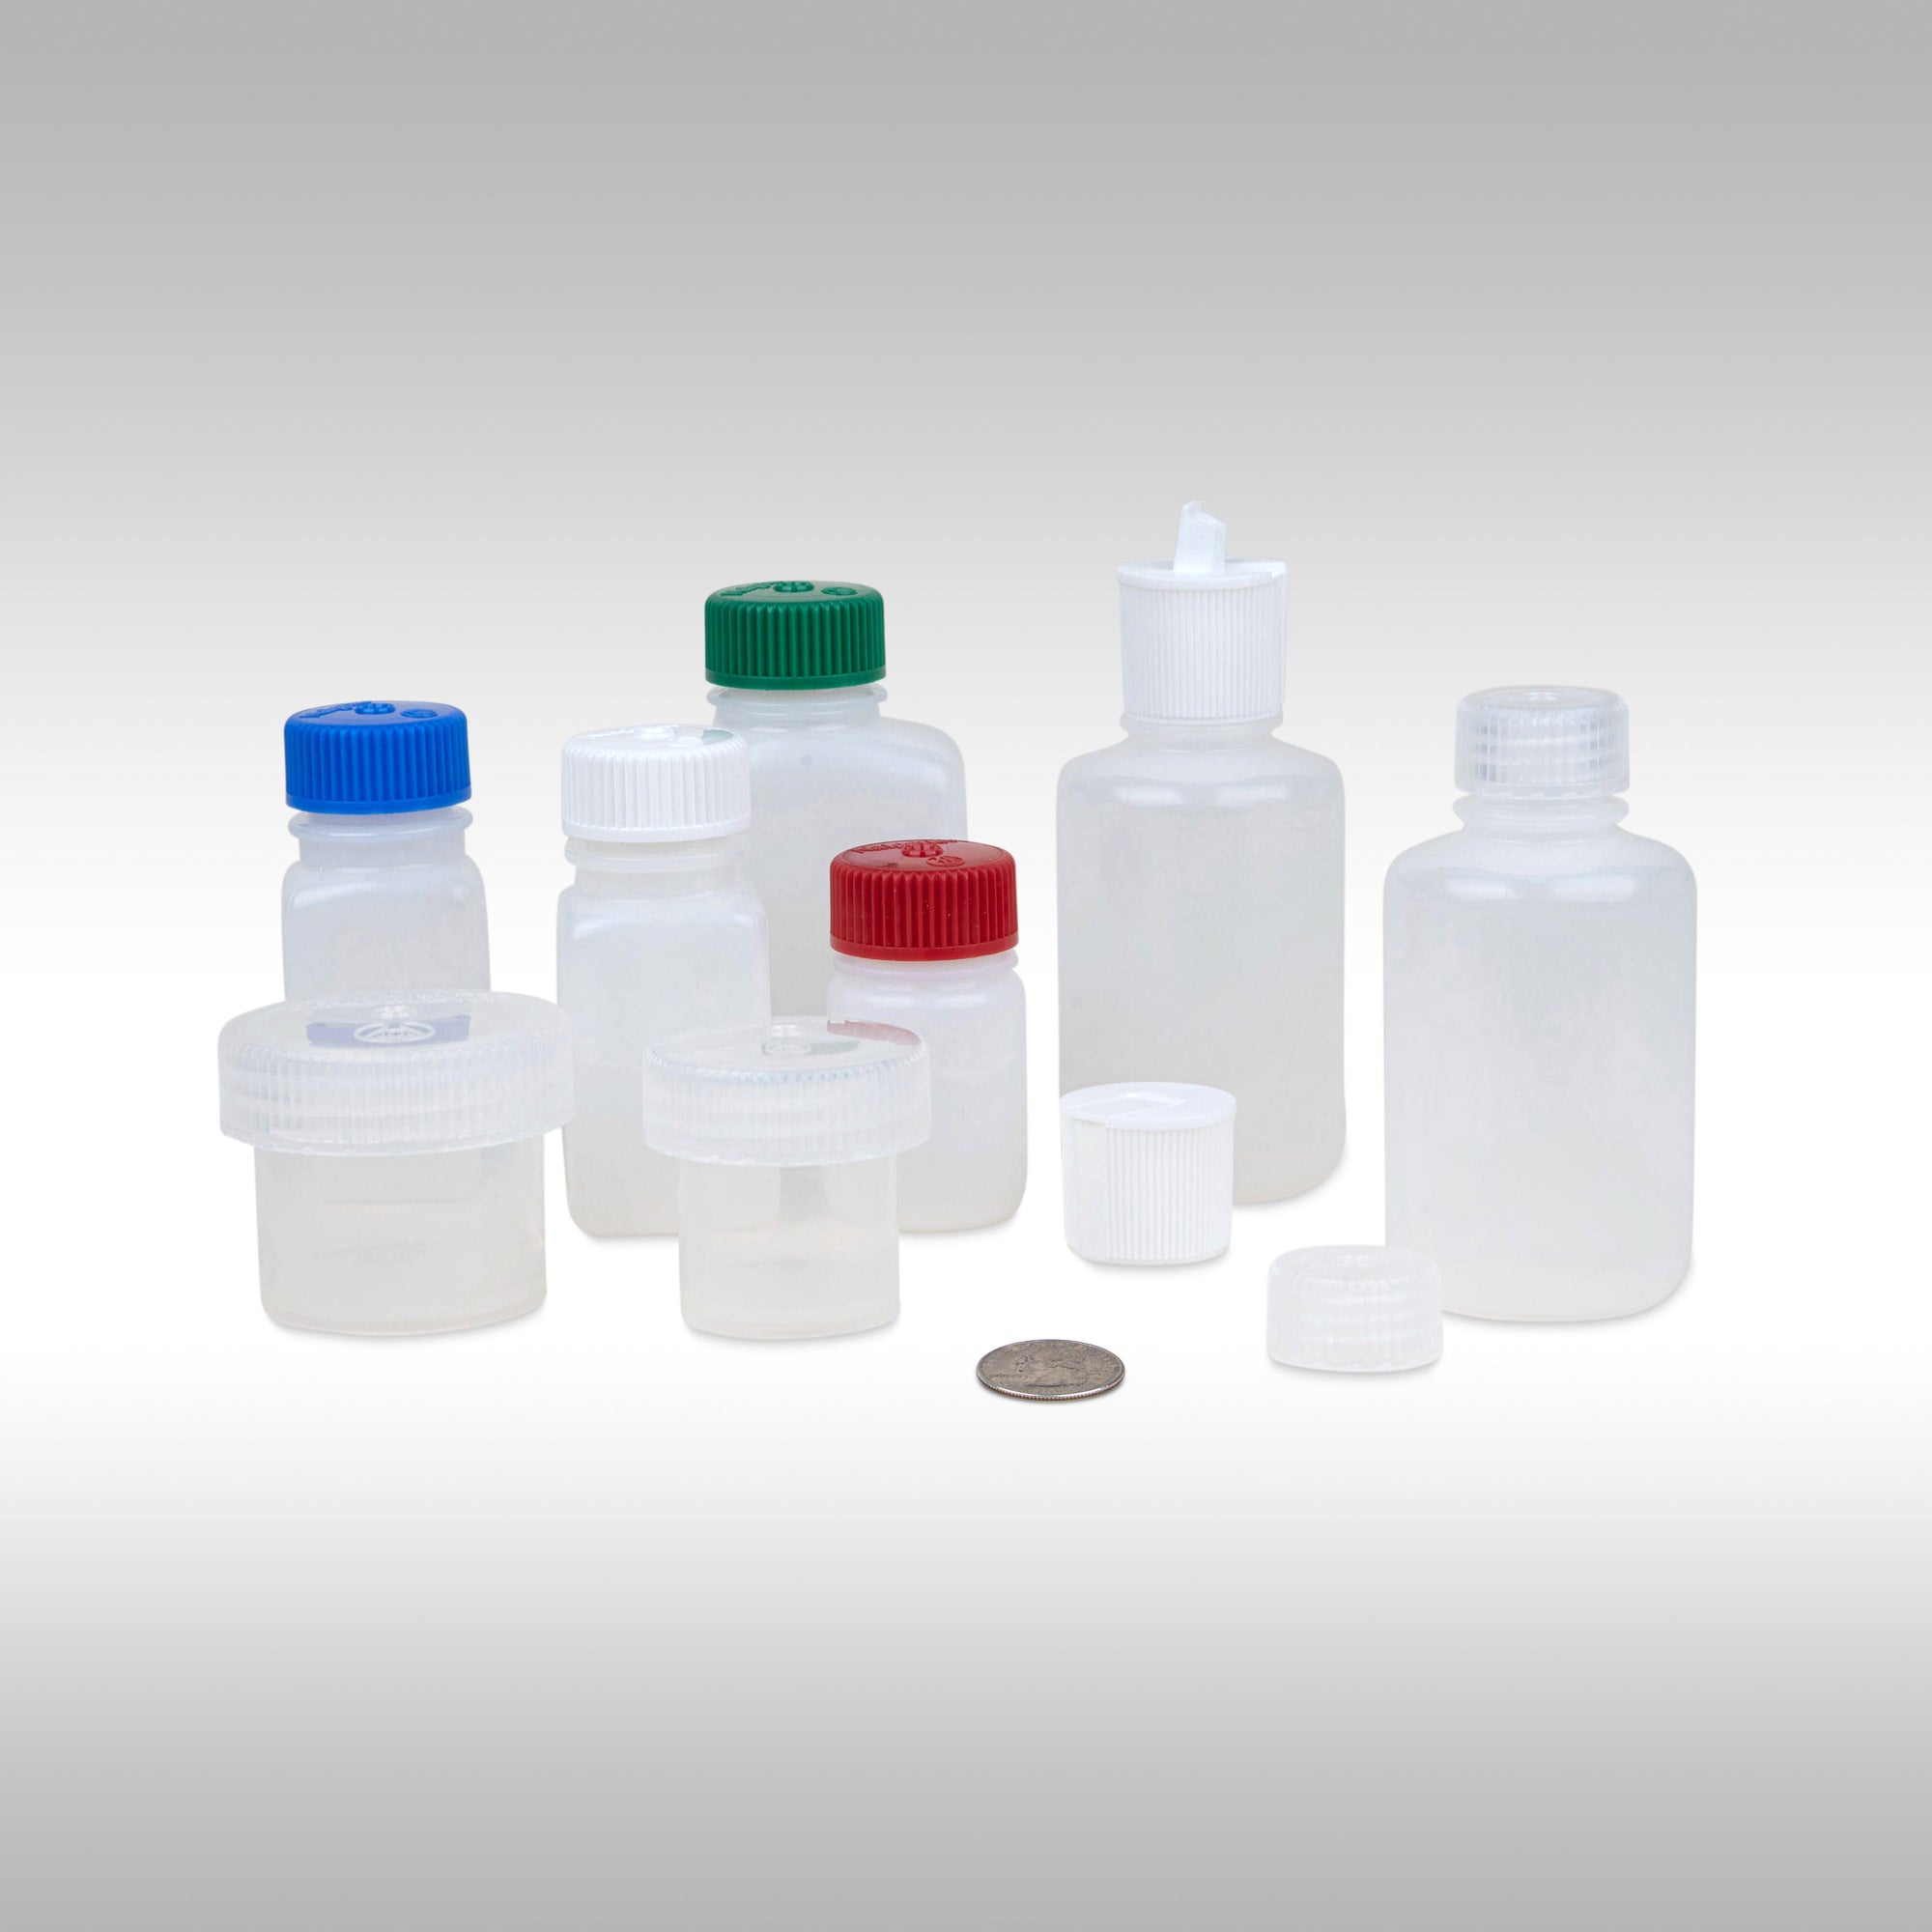 Nalgene travel bottle kits keep your personal care items contained while on the go. Assorted sizes of very high quality bottles in the smaller sizes you need for travel toiletry and kitchen supplies.